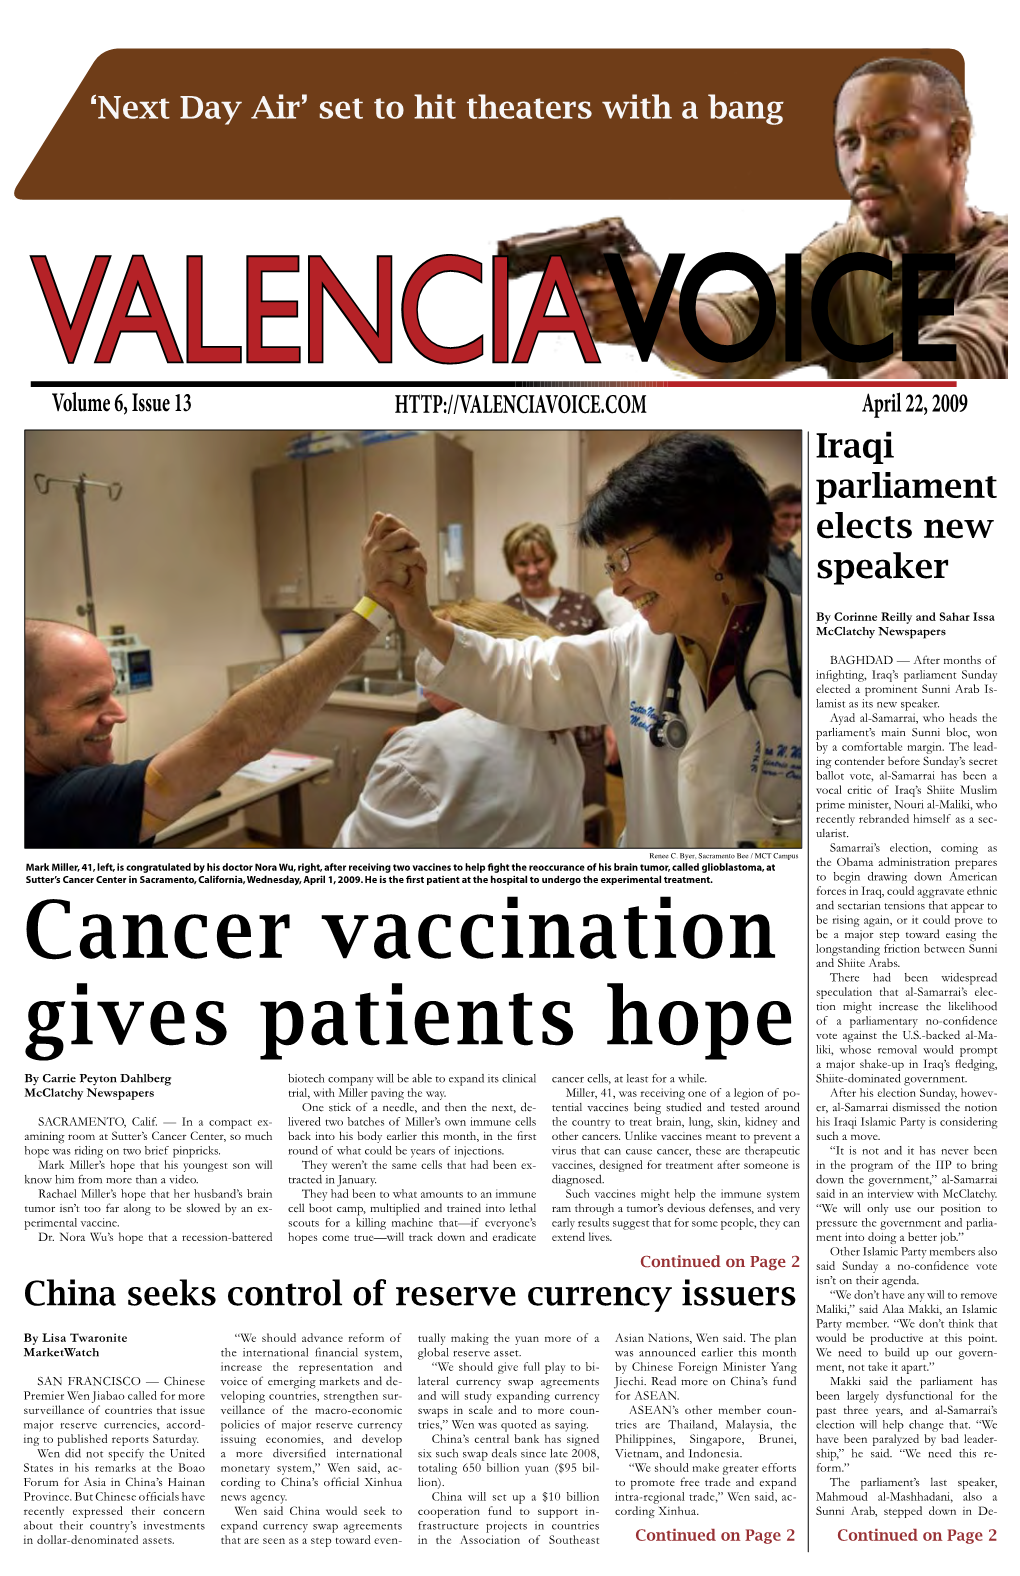 Cancer Vaccination Gives Patients Hope